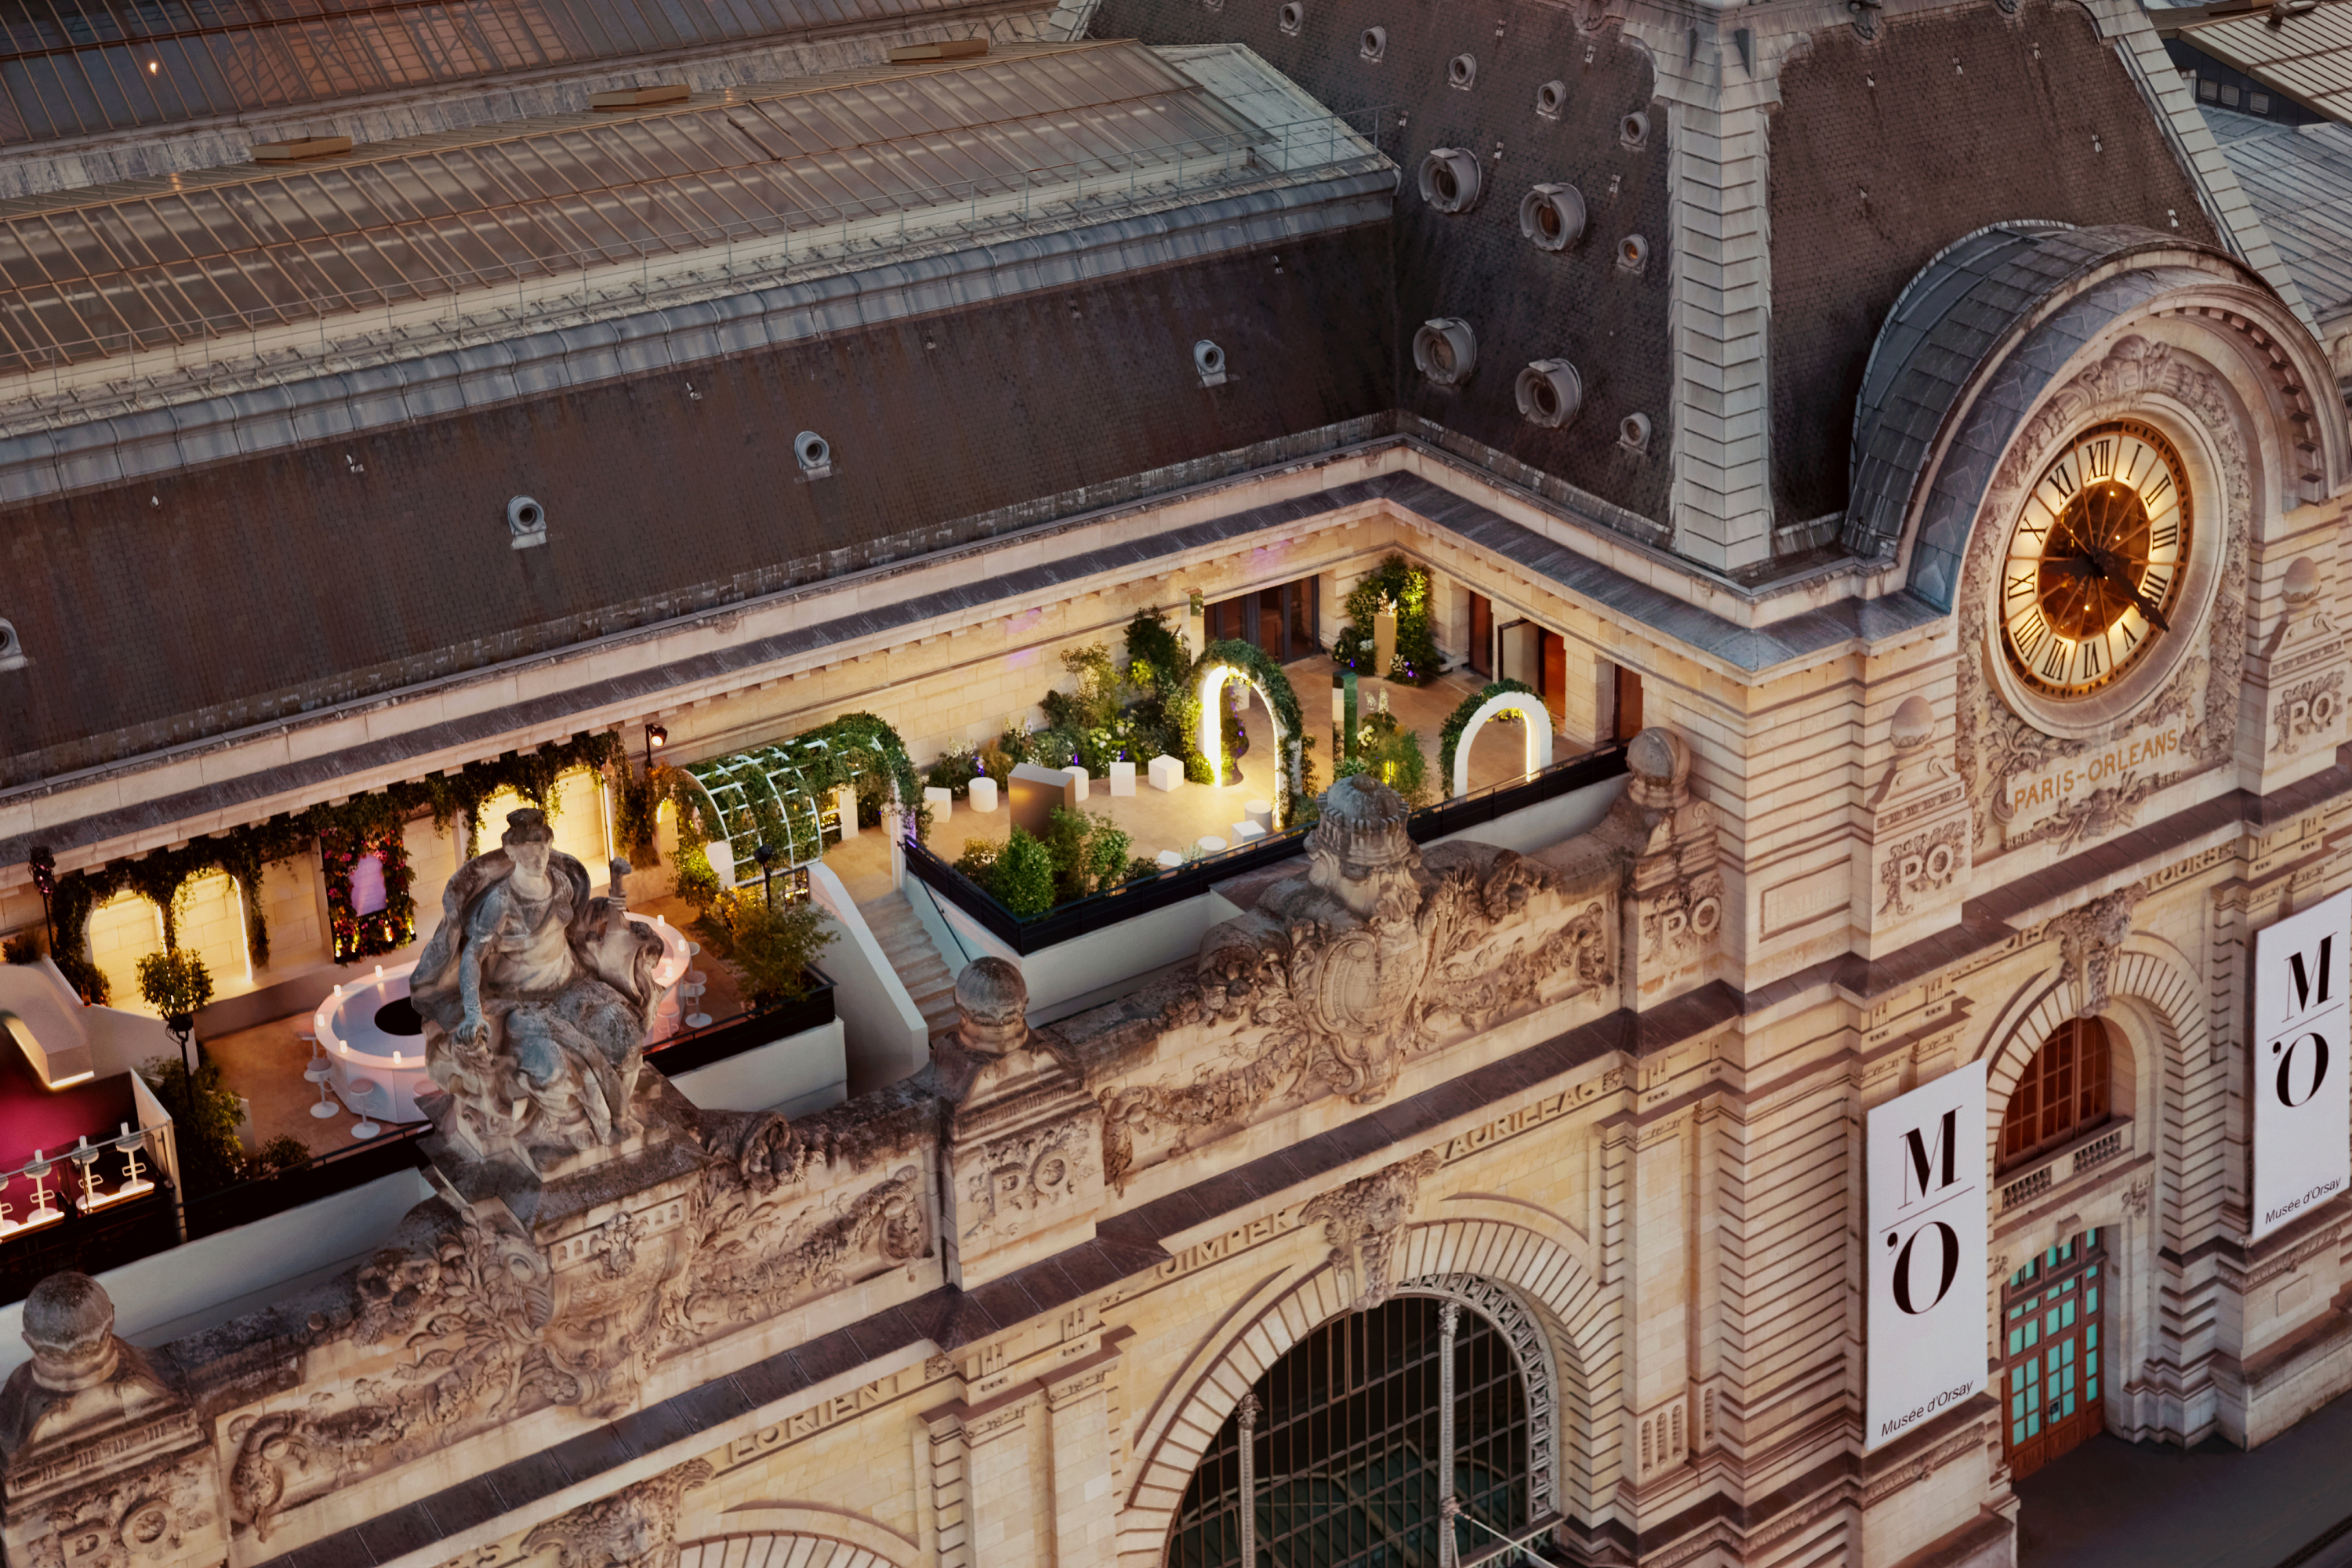 Aerial view of the terrace of the Musée d'Orsay.